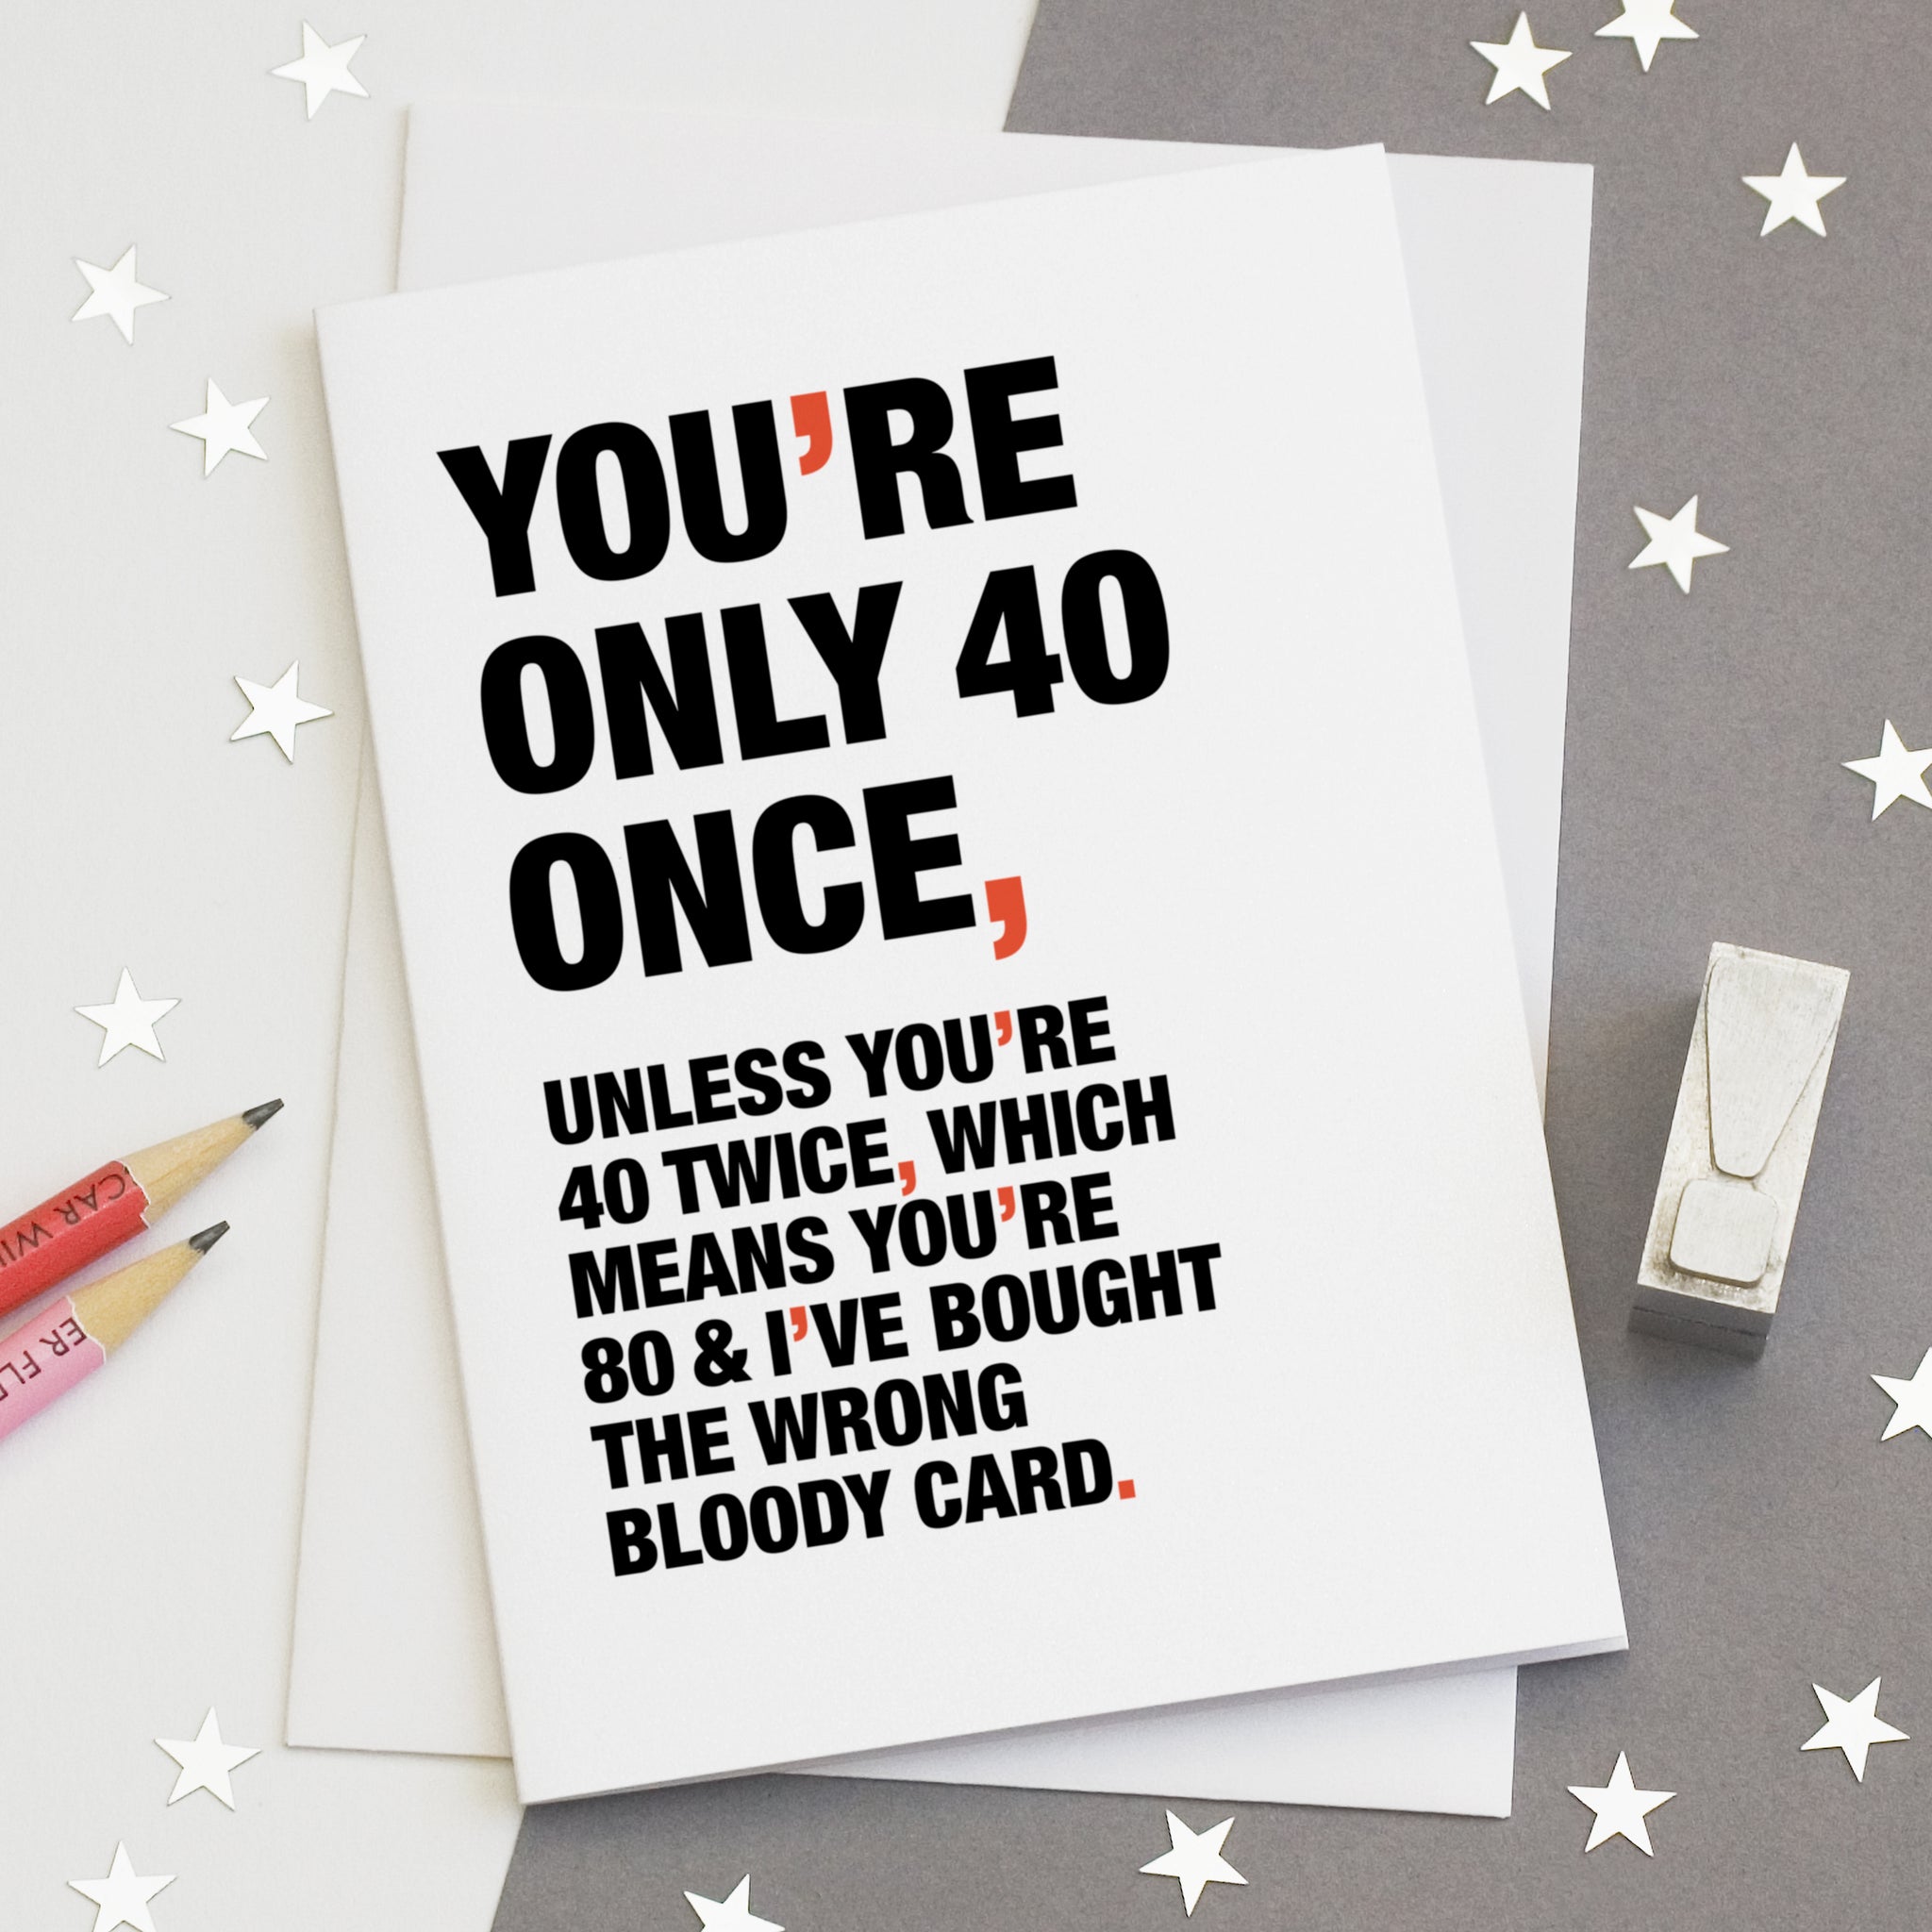 A funny birthday card saying 'you're only 40 once, unless you're 40 twice, which means you're 80 and I've bought the wrong bloody card'.